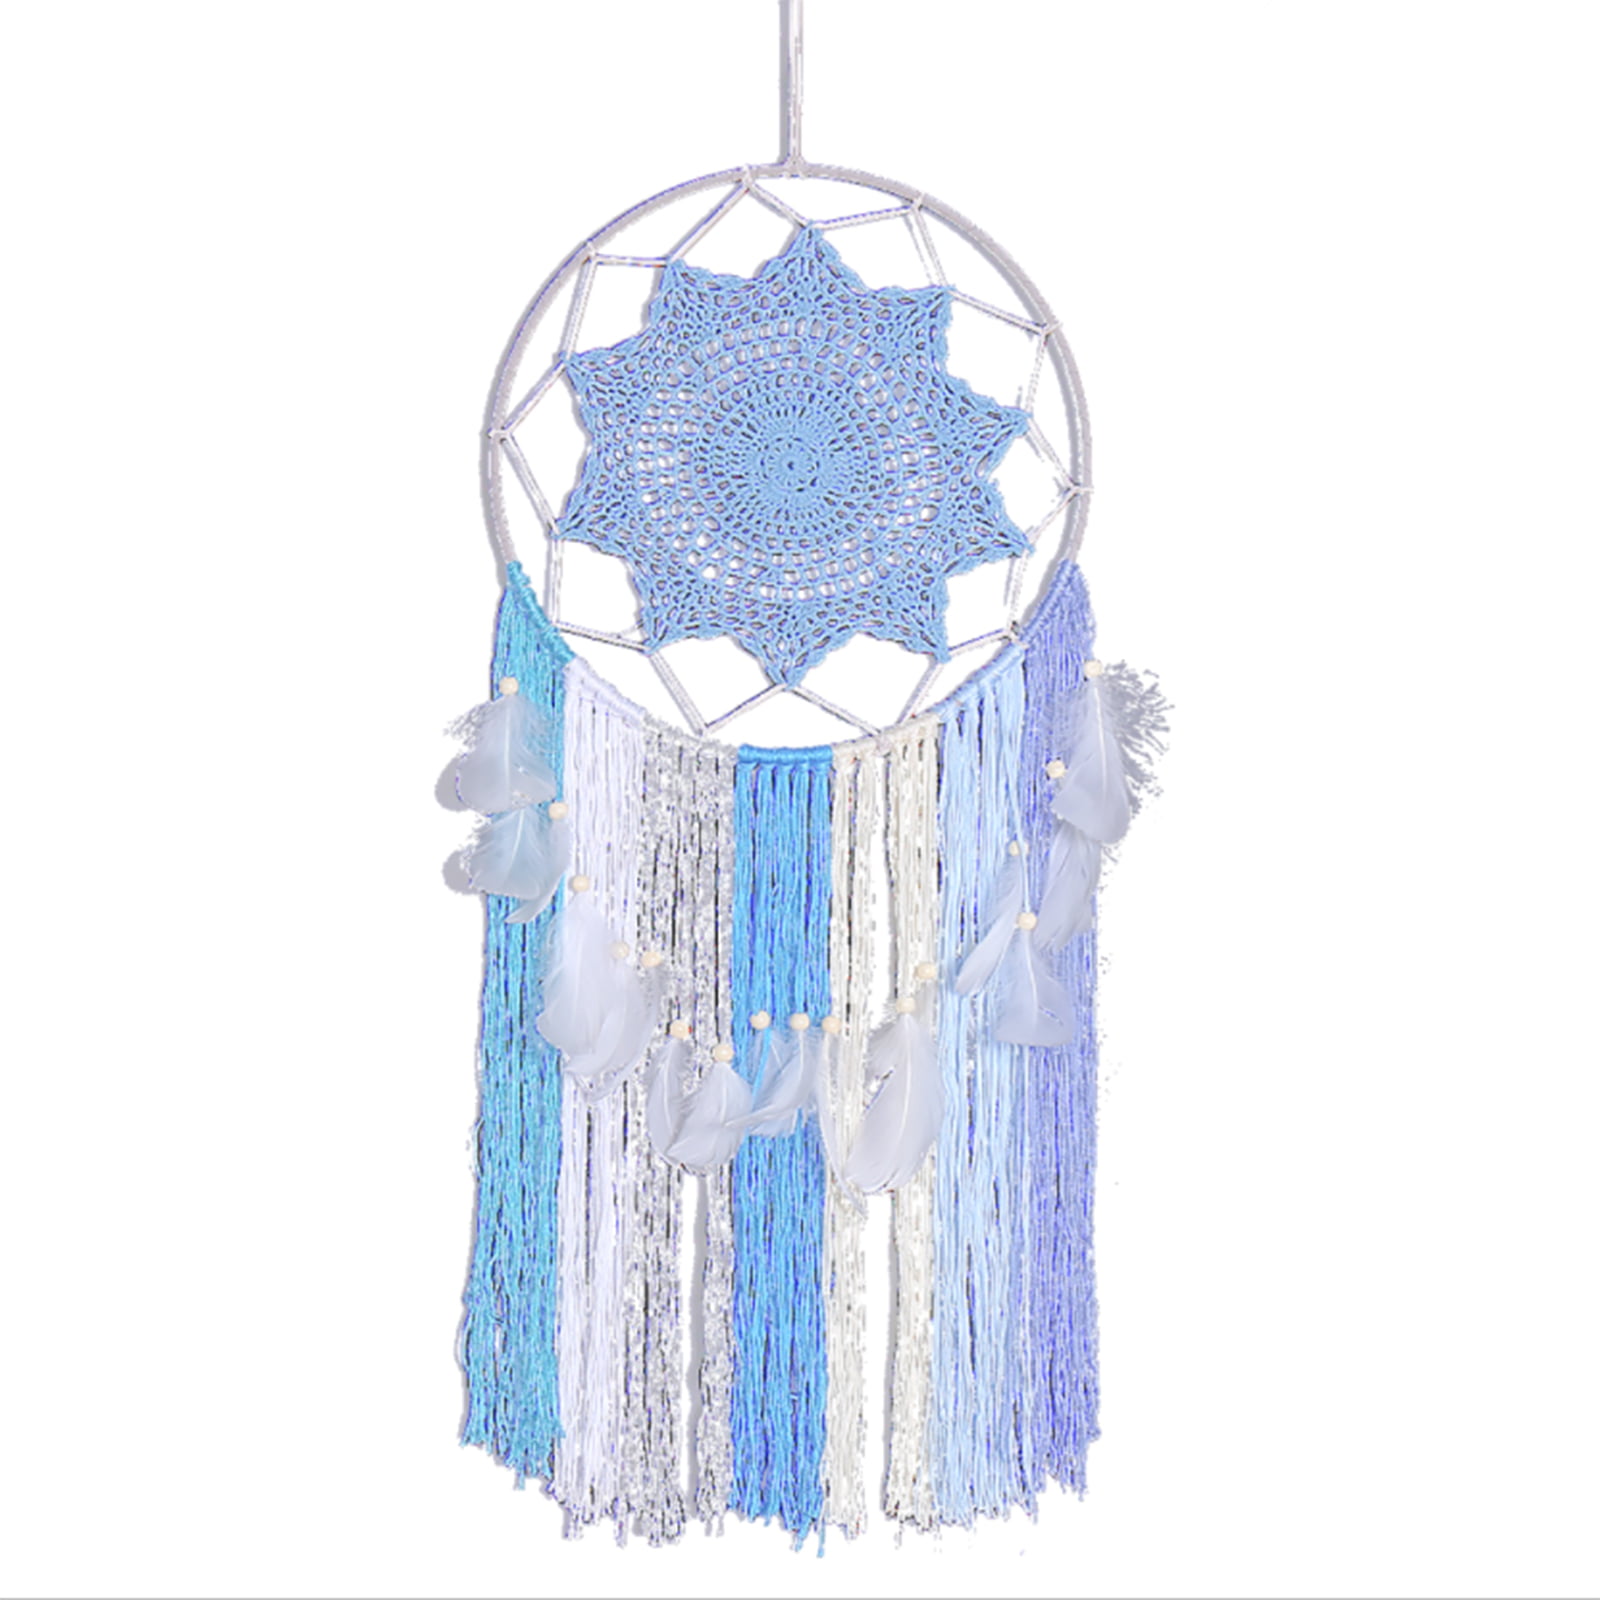 Details about   Dream Catchers for Bedroom Tassel Wall Hanging Handmade Dreamcatchers Home 